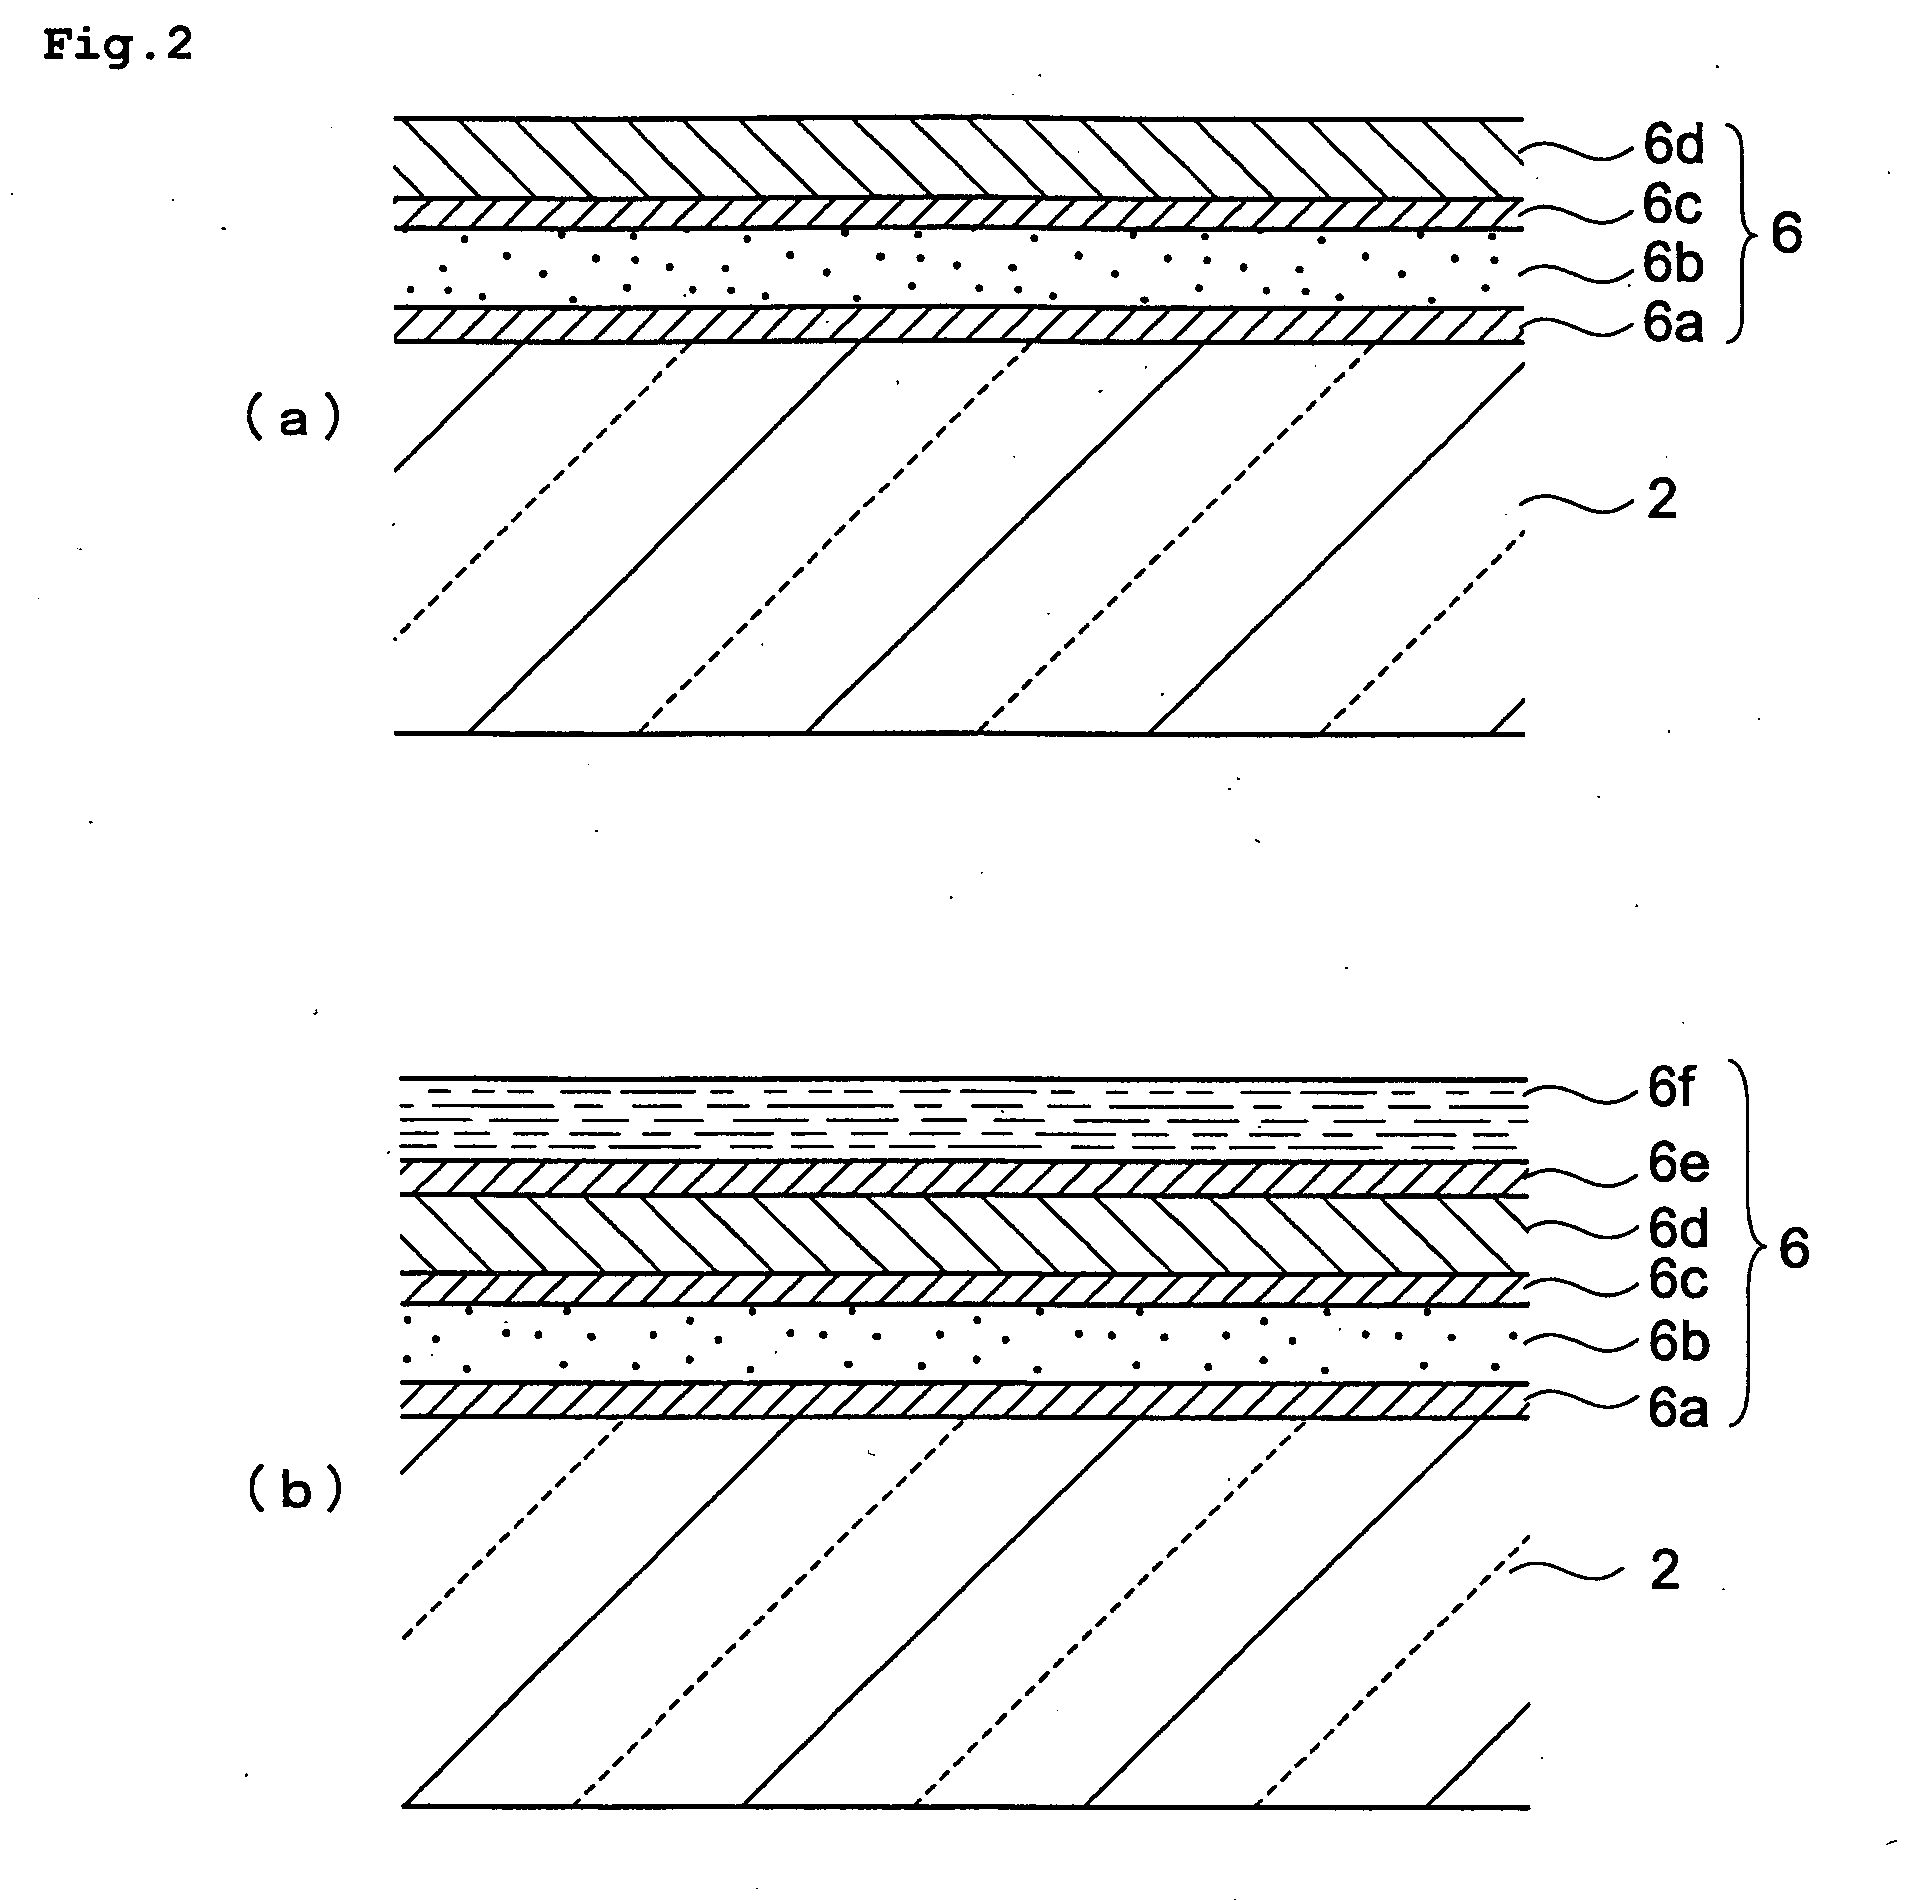 Multicolor Development Glass Vessel and Process for Producing the Same